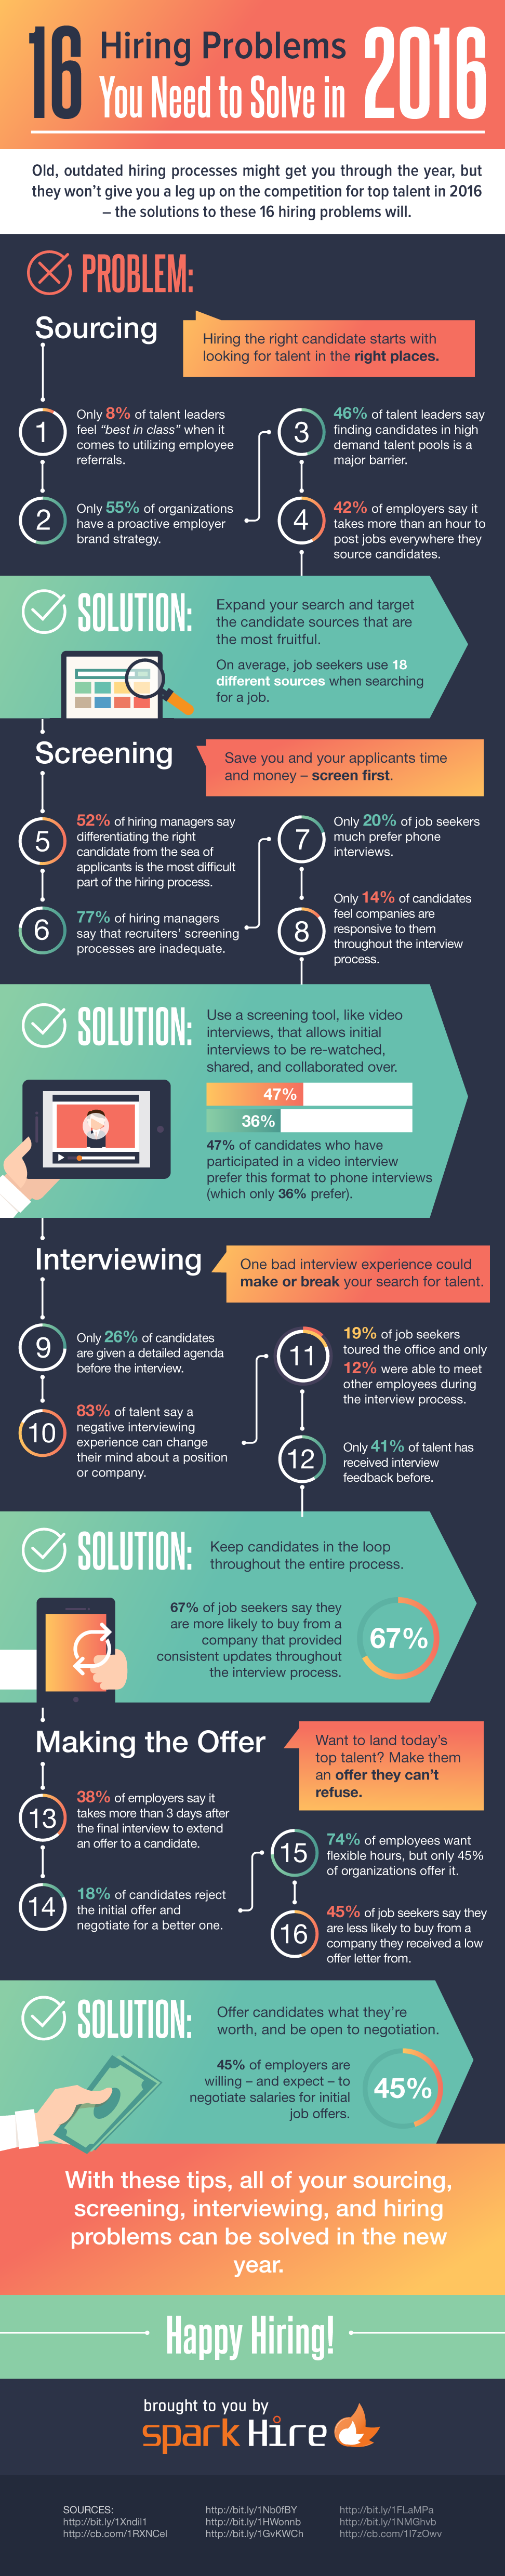 2016 Hiring Problems Infographic